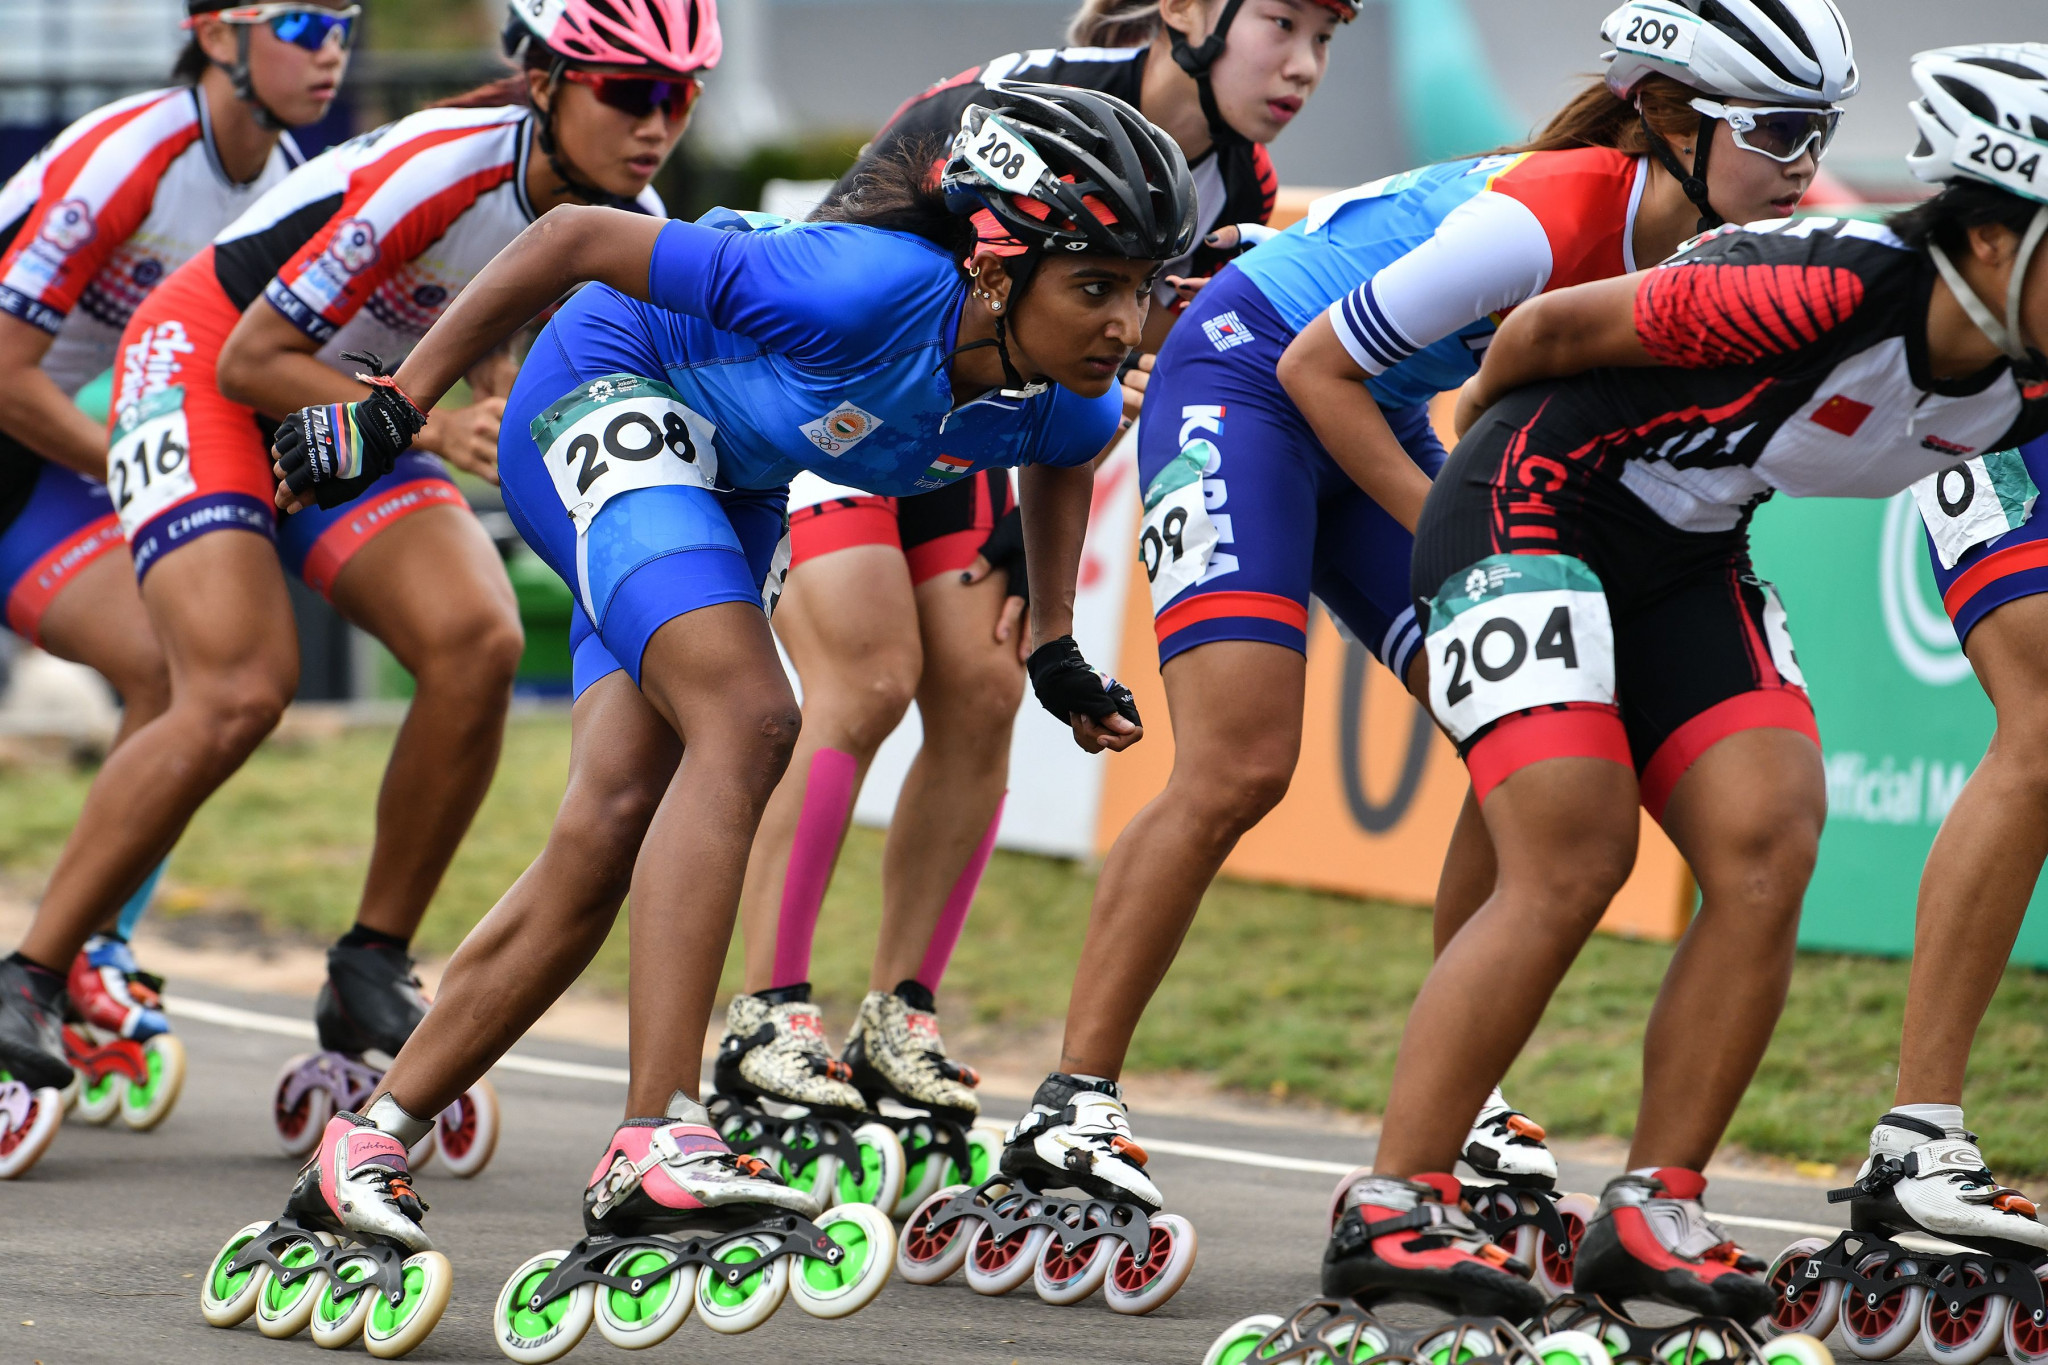 Both the men's and women's 20 kilometre roller skate races took place today, events which have not been held in the Asian Games before ©Getty Images